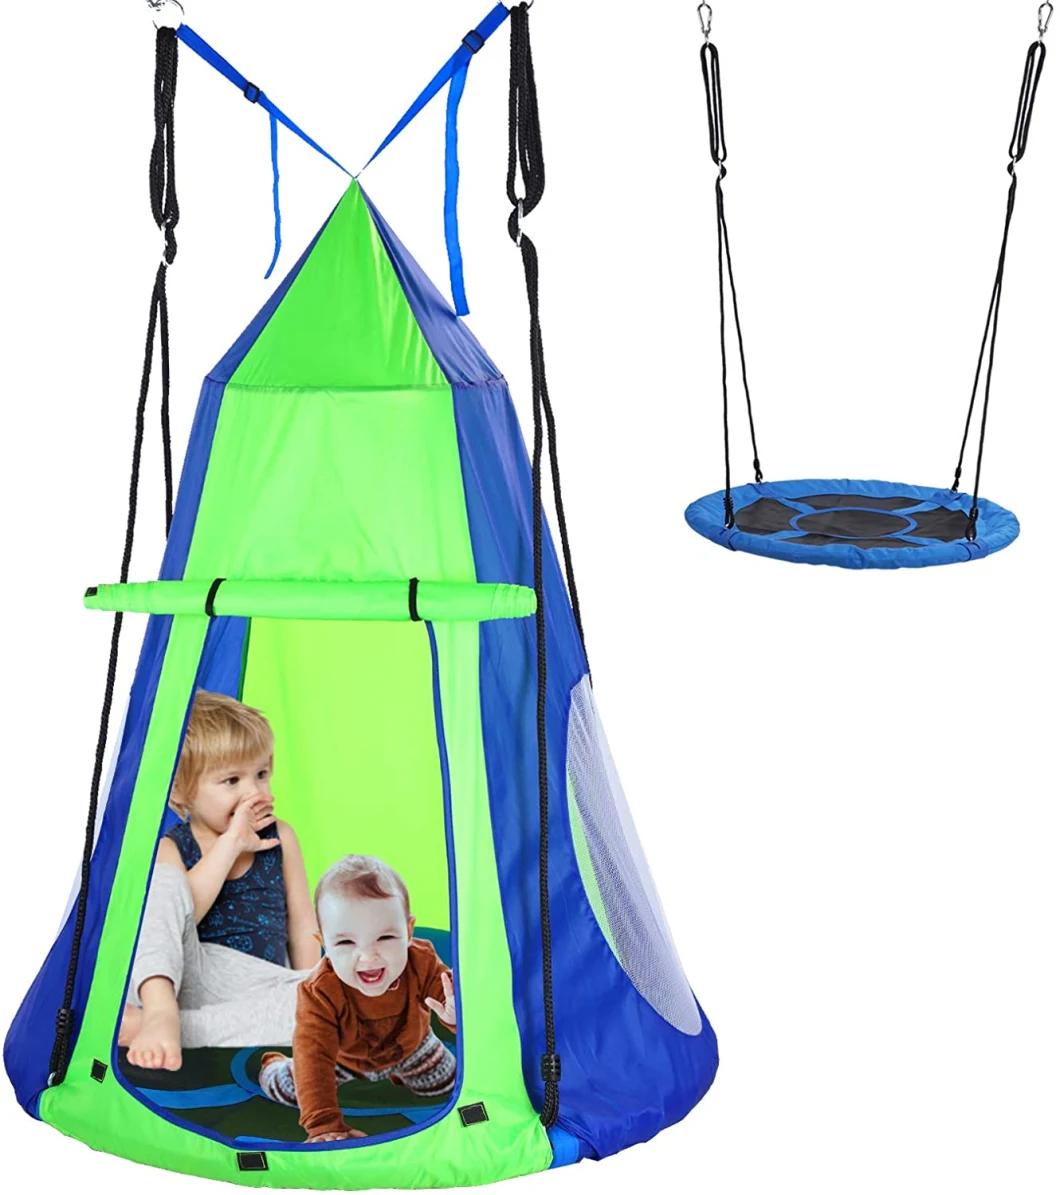 New Safer Outdoor Backyard Toy Tree Swing Tent